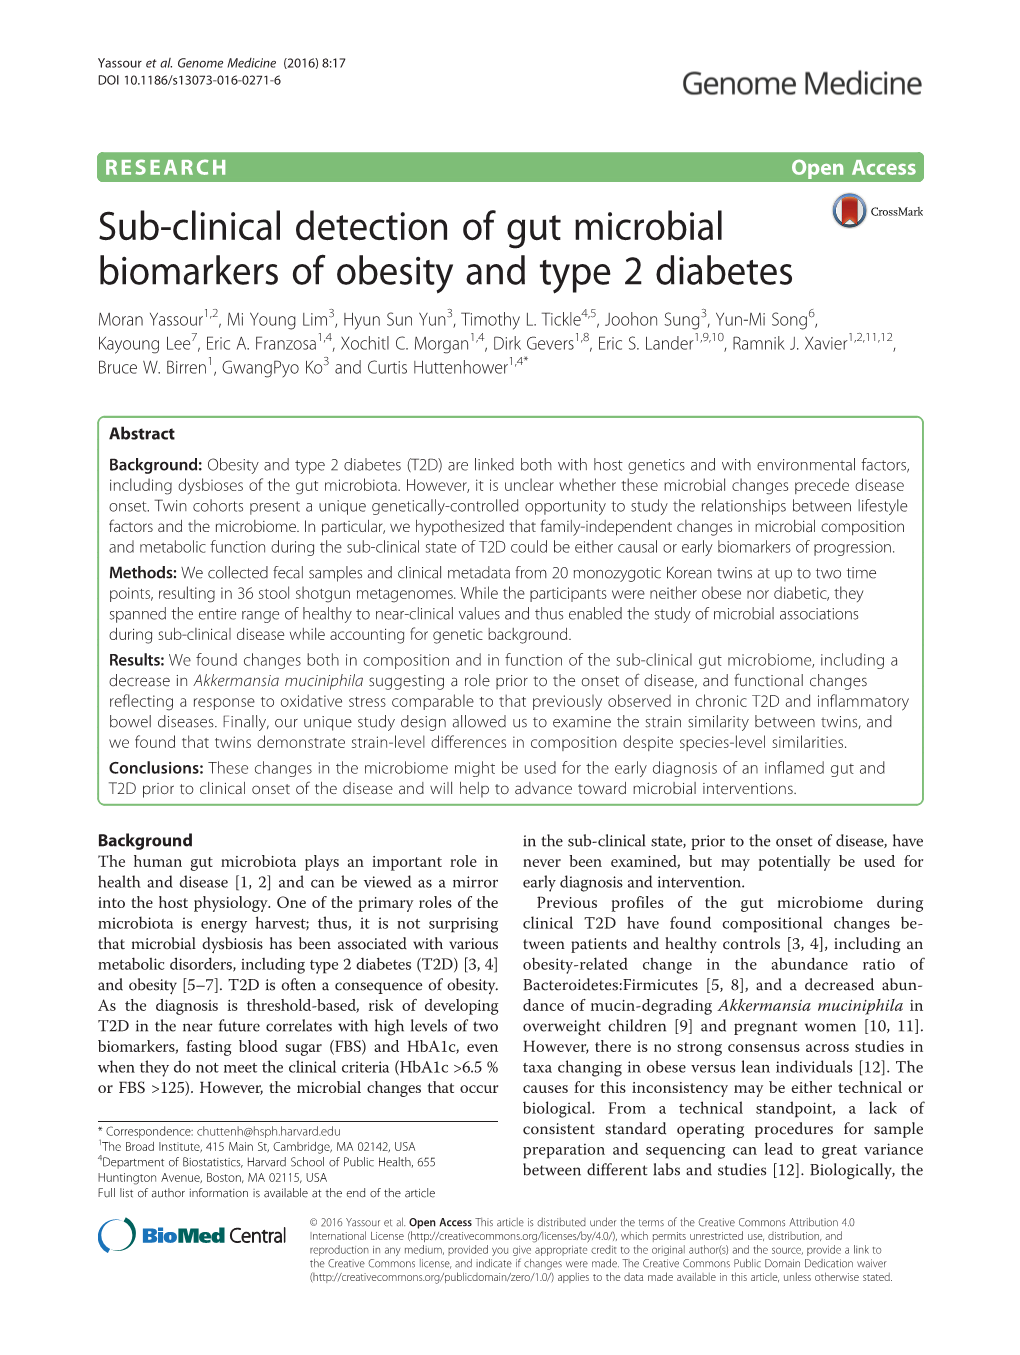 Sub-Clinical Detection of Gut Microbial Biomarkers of Obesity and Type 2 Diabetes Moran Yassour1,2, Mi Young Lim3, Hyun Sun Yun3, Timothy L